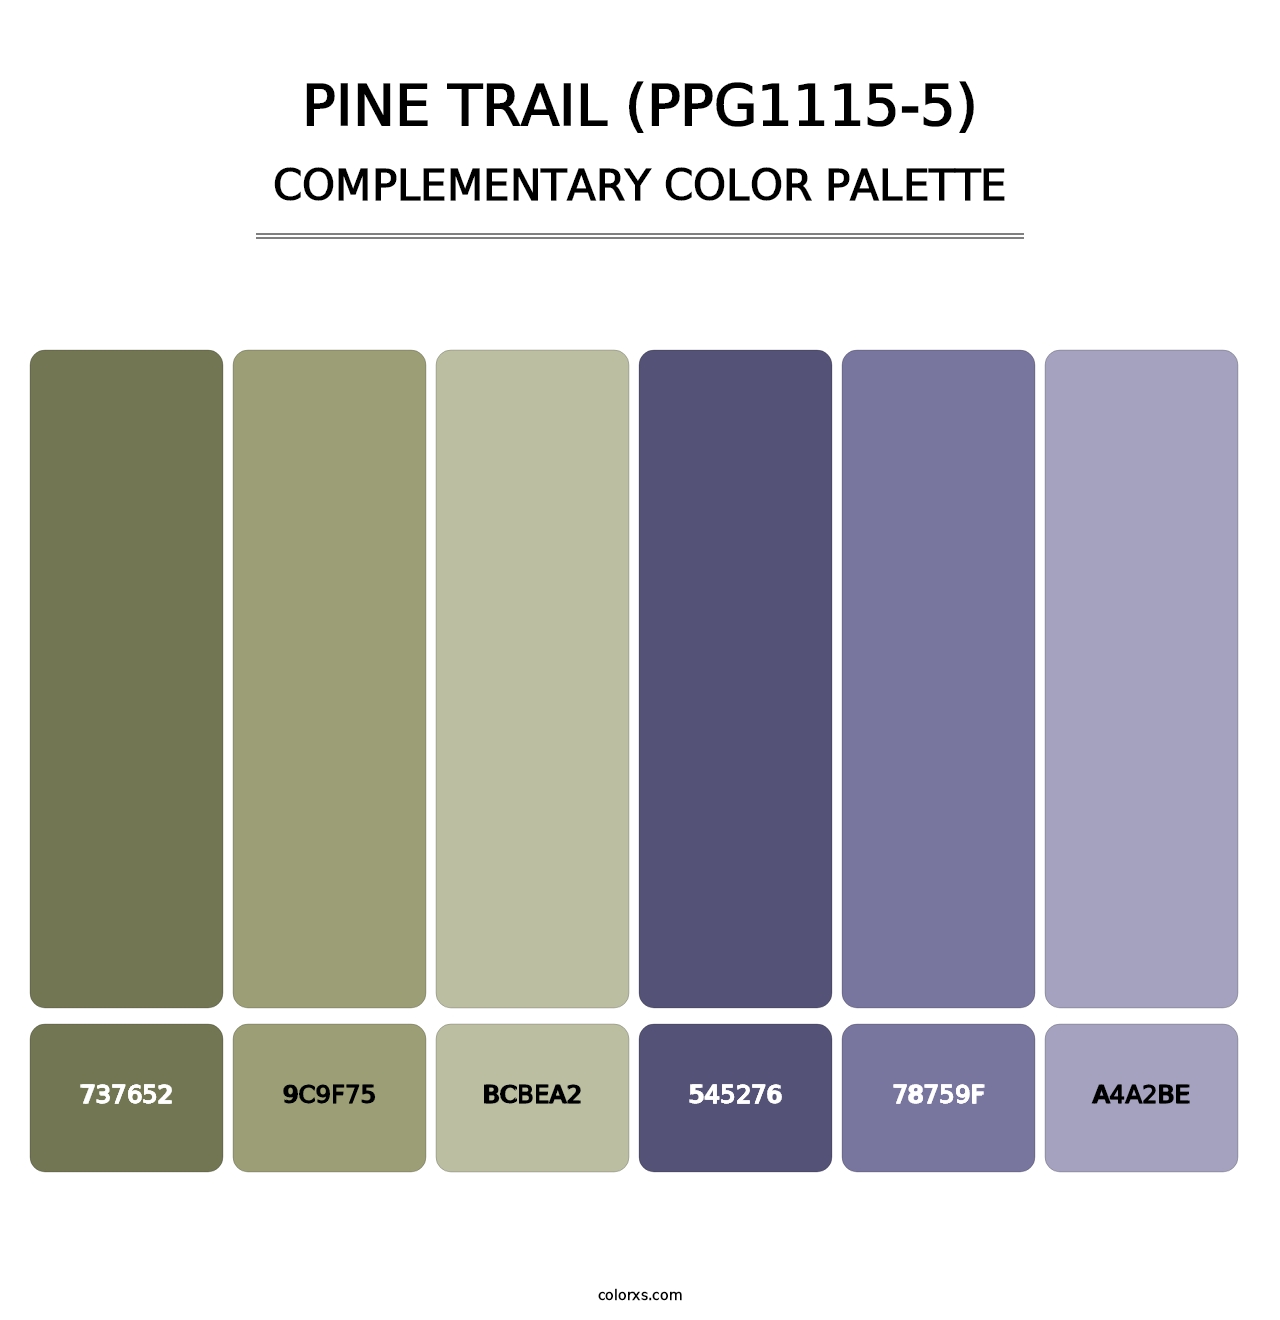 Pine Trail (PPG1115-5) - Complementary Color Palette